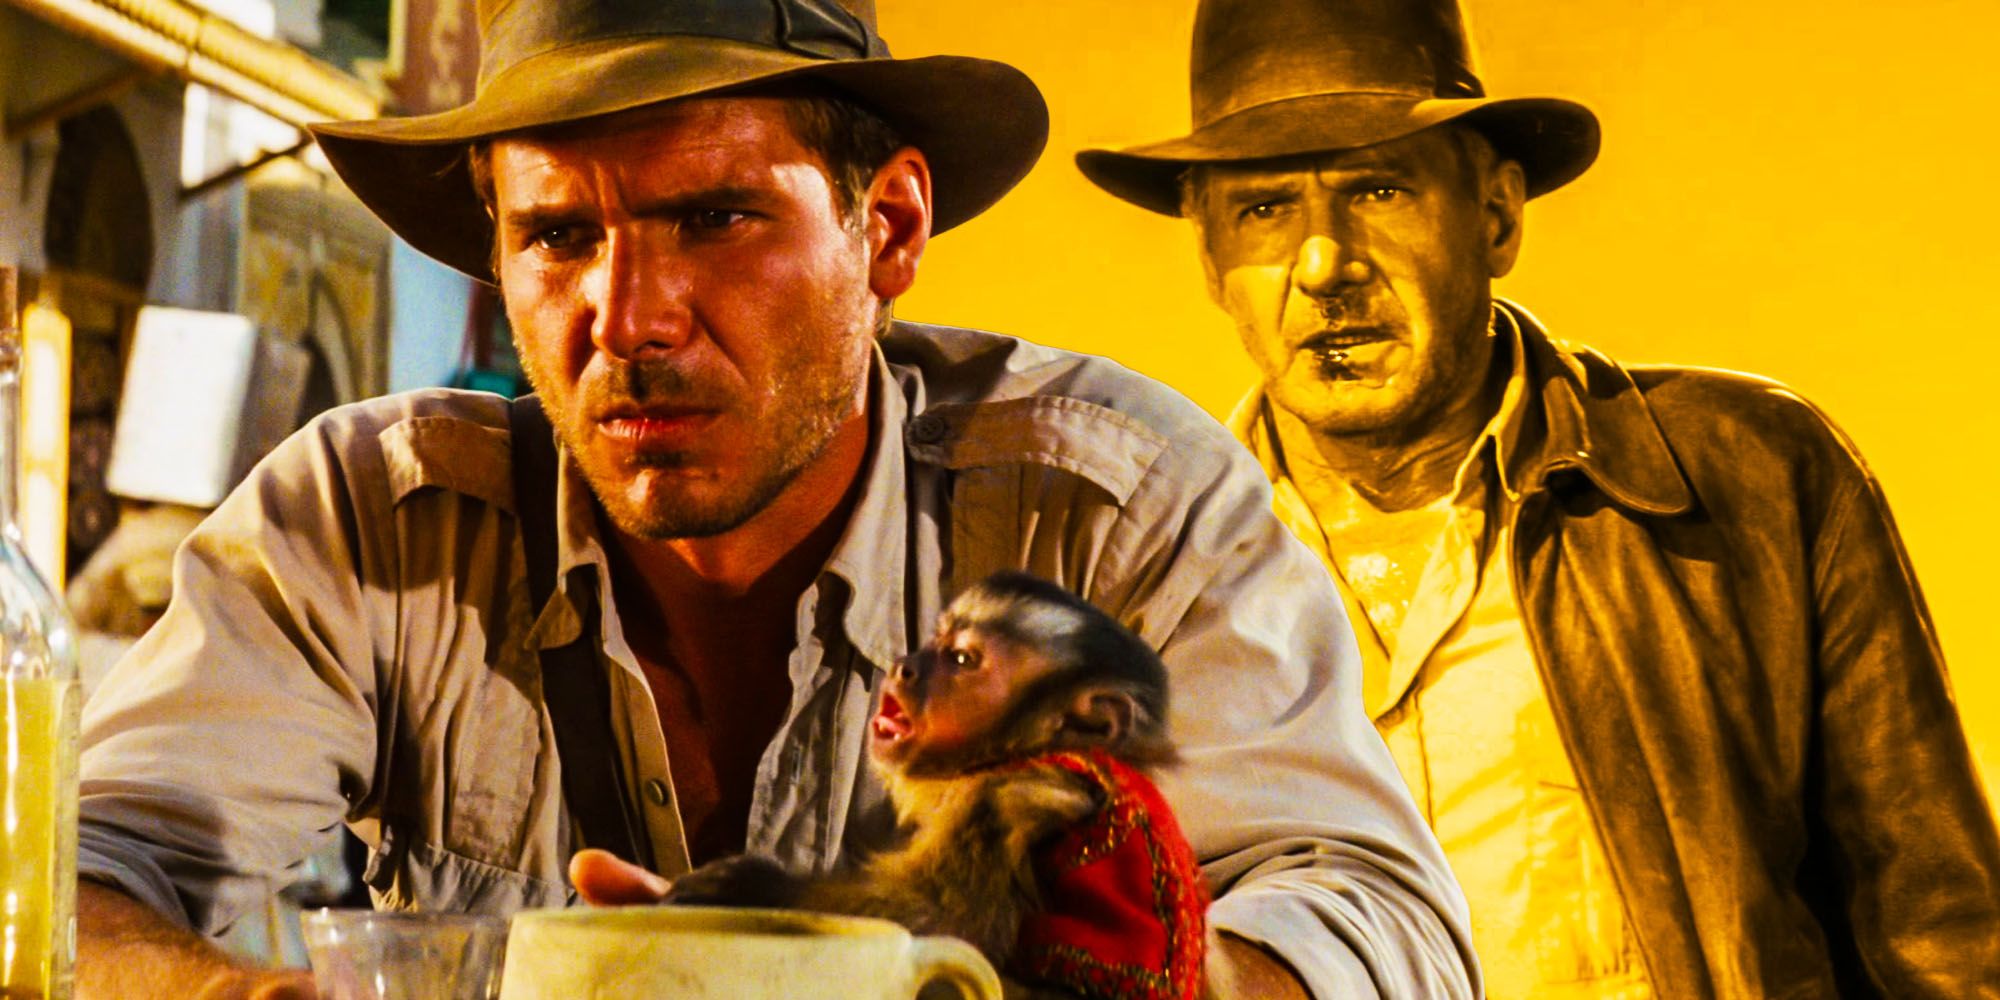 Harrison Ford perfect response to playing old Indiana Jones